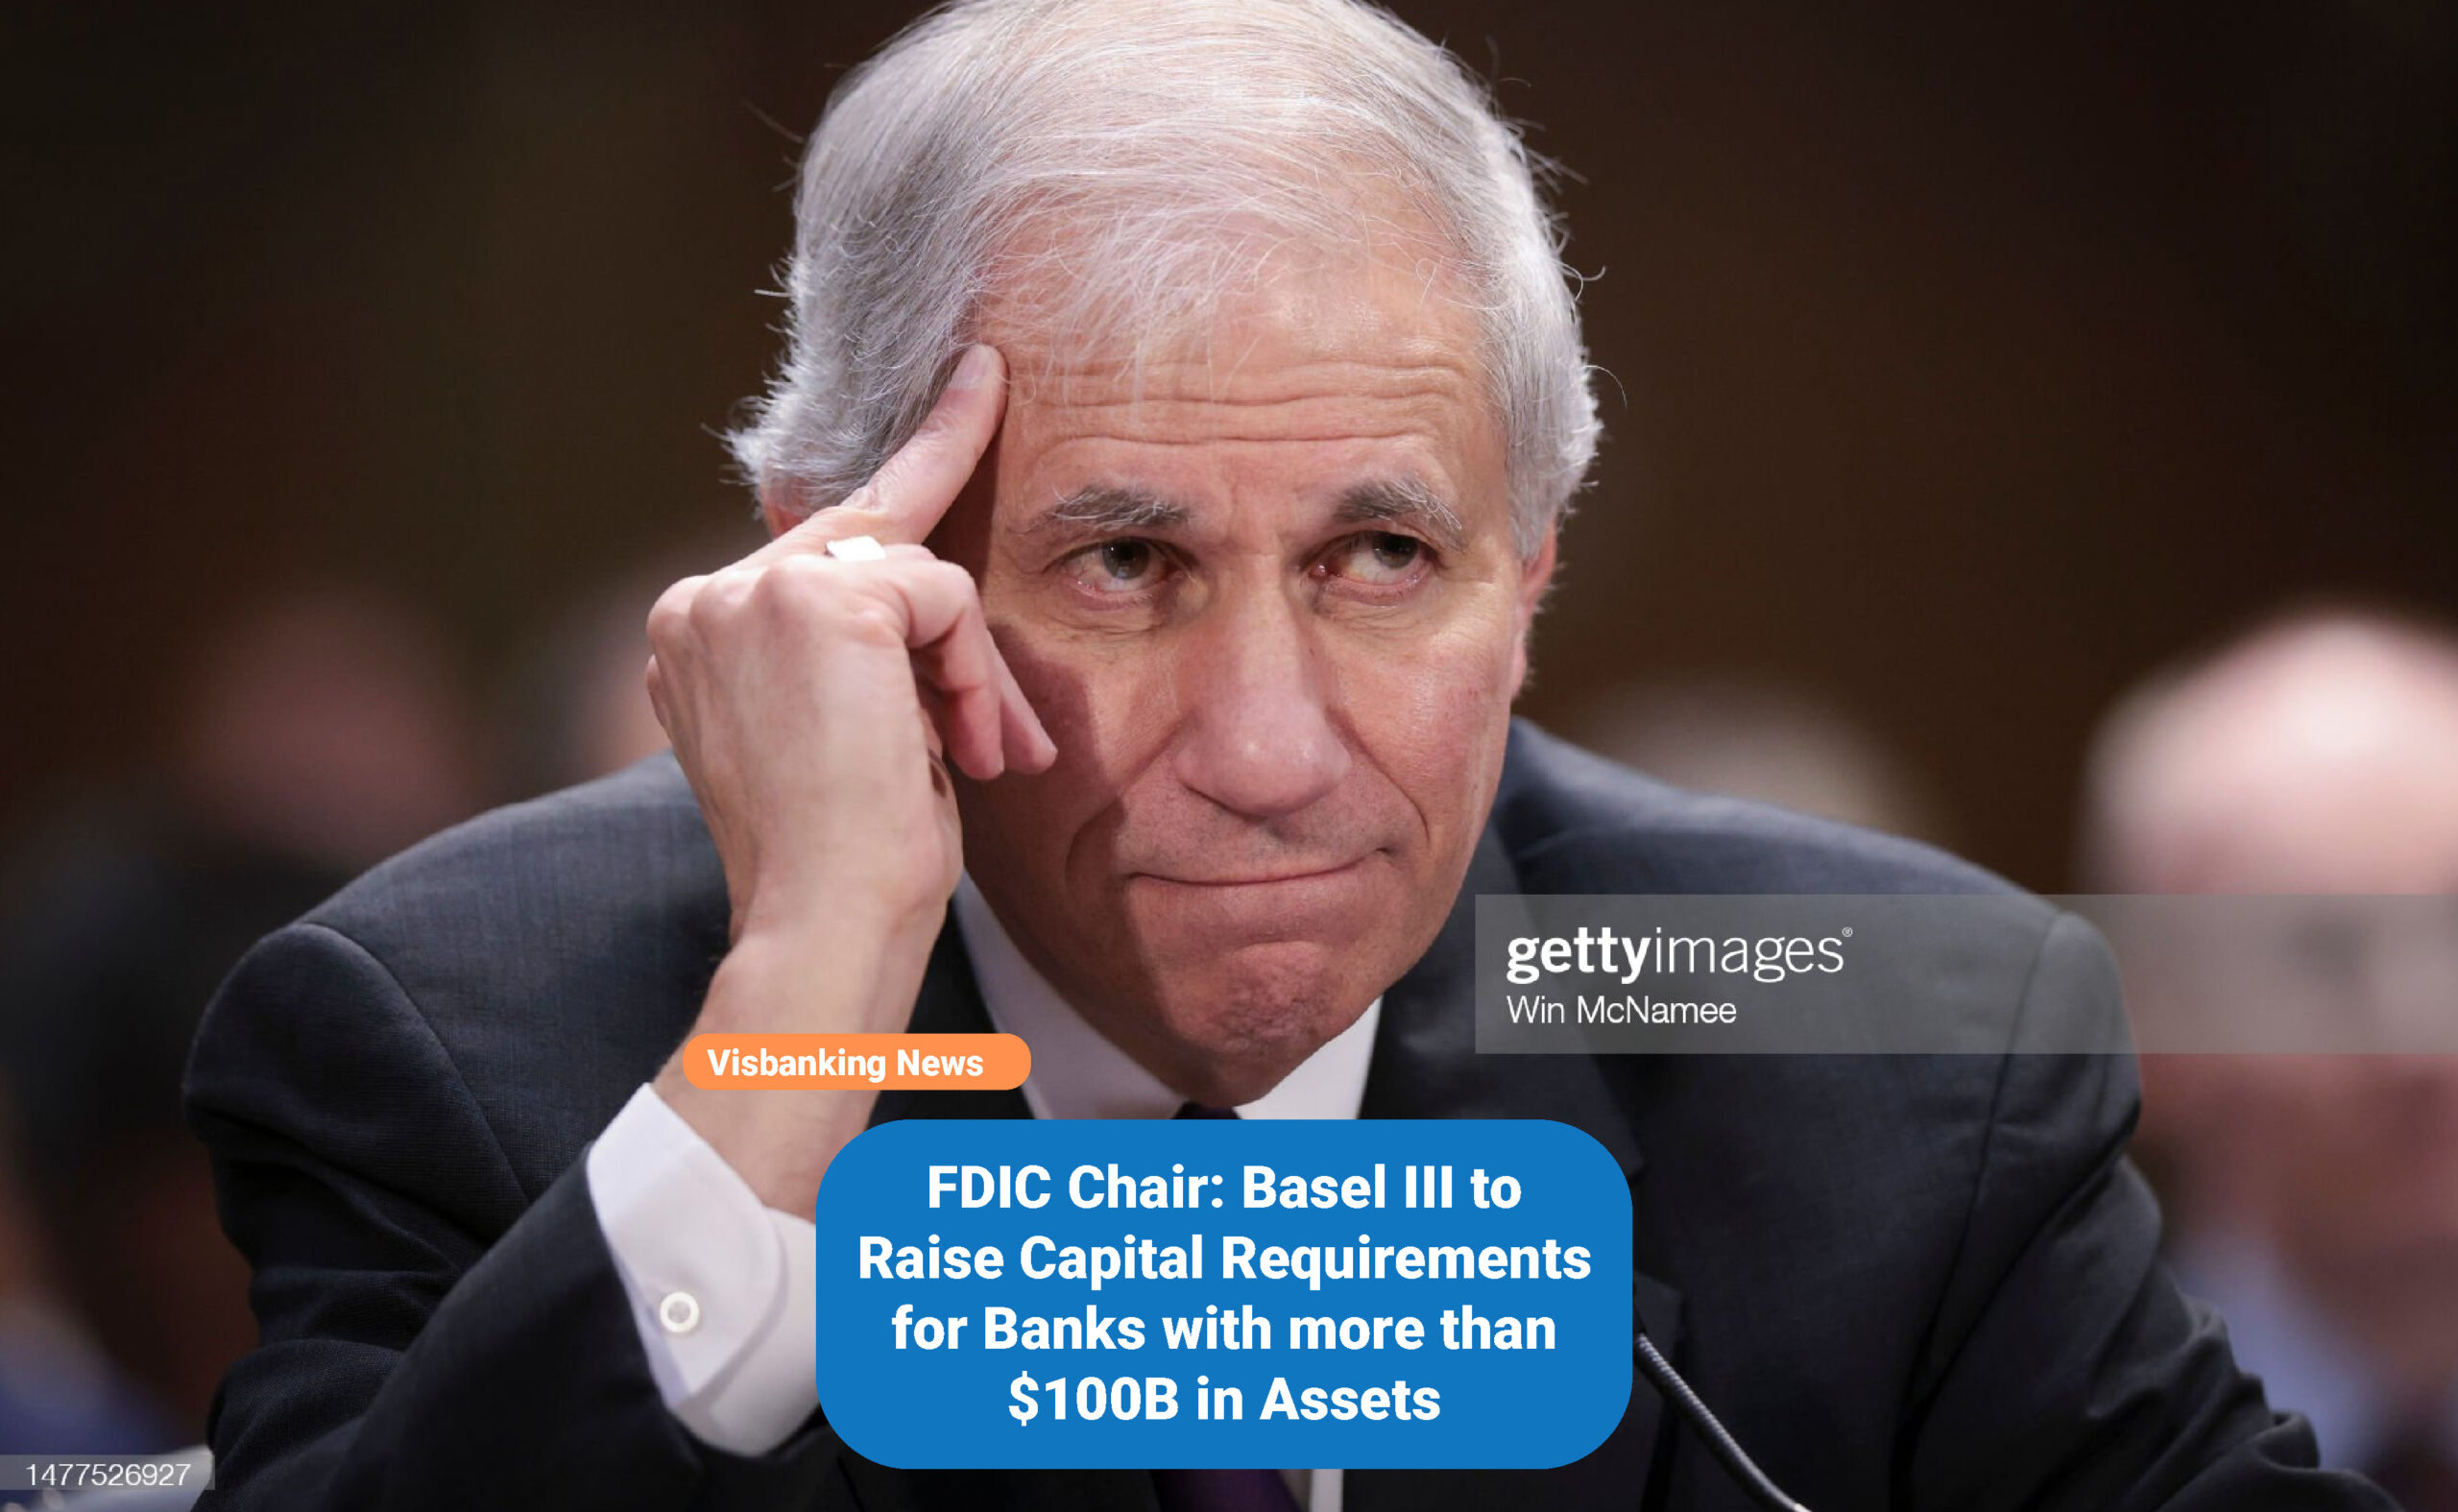 FDIC Chair: Basel III to Raise Capital Requirements for Banks with more than $100B in Assets